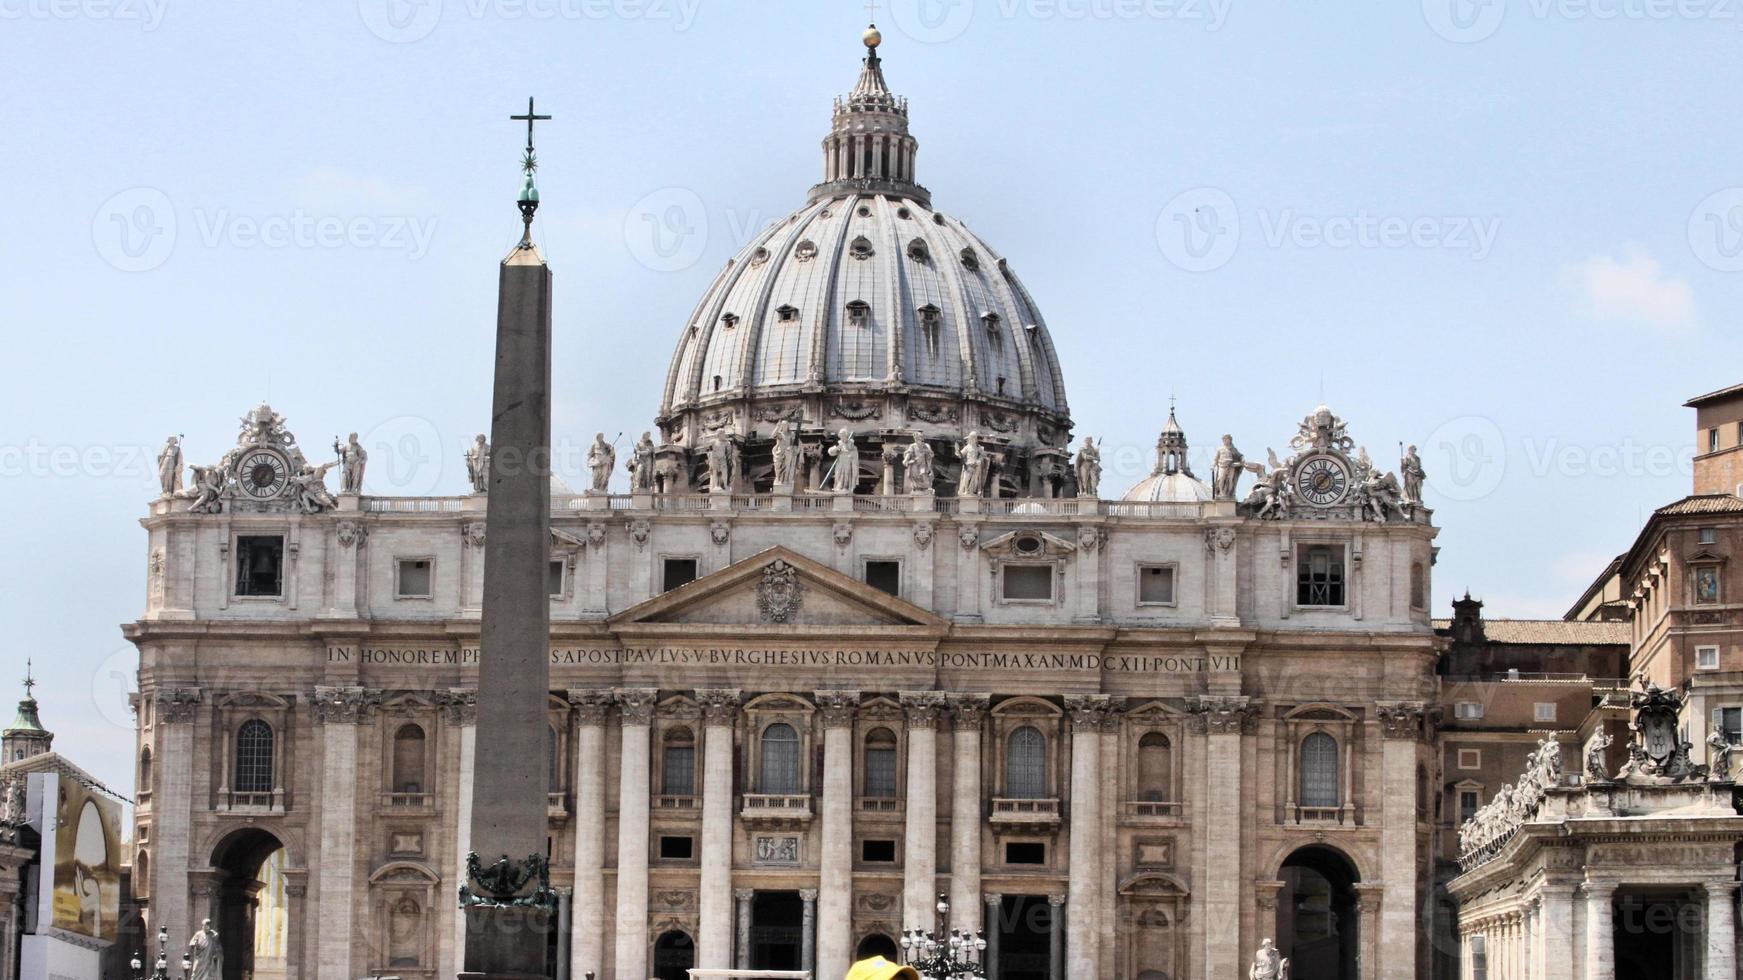 A view of St Peter's Basilica in the Vatican photo